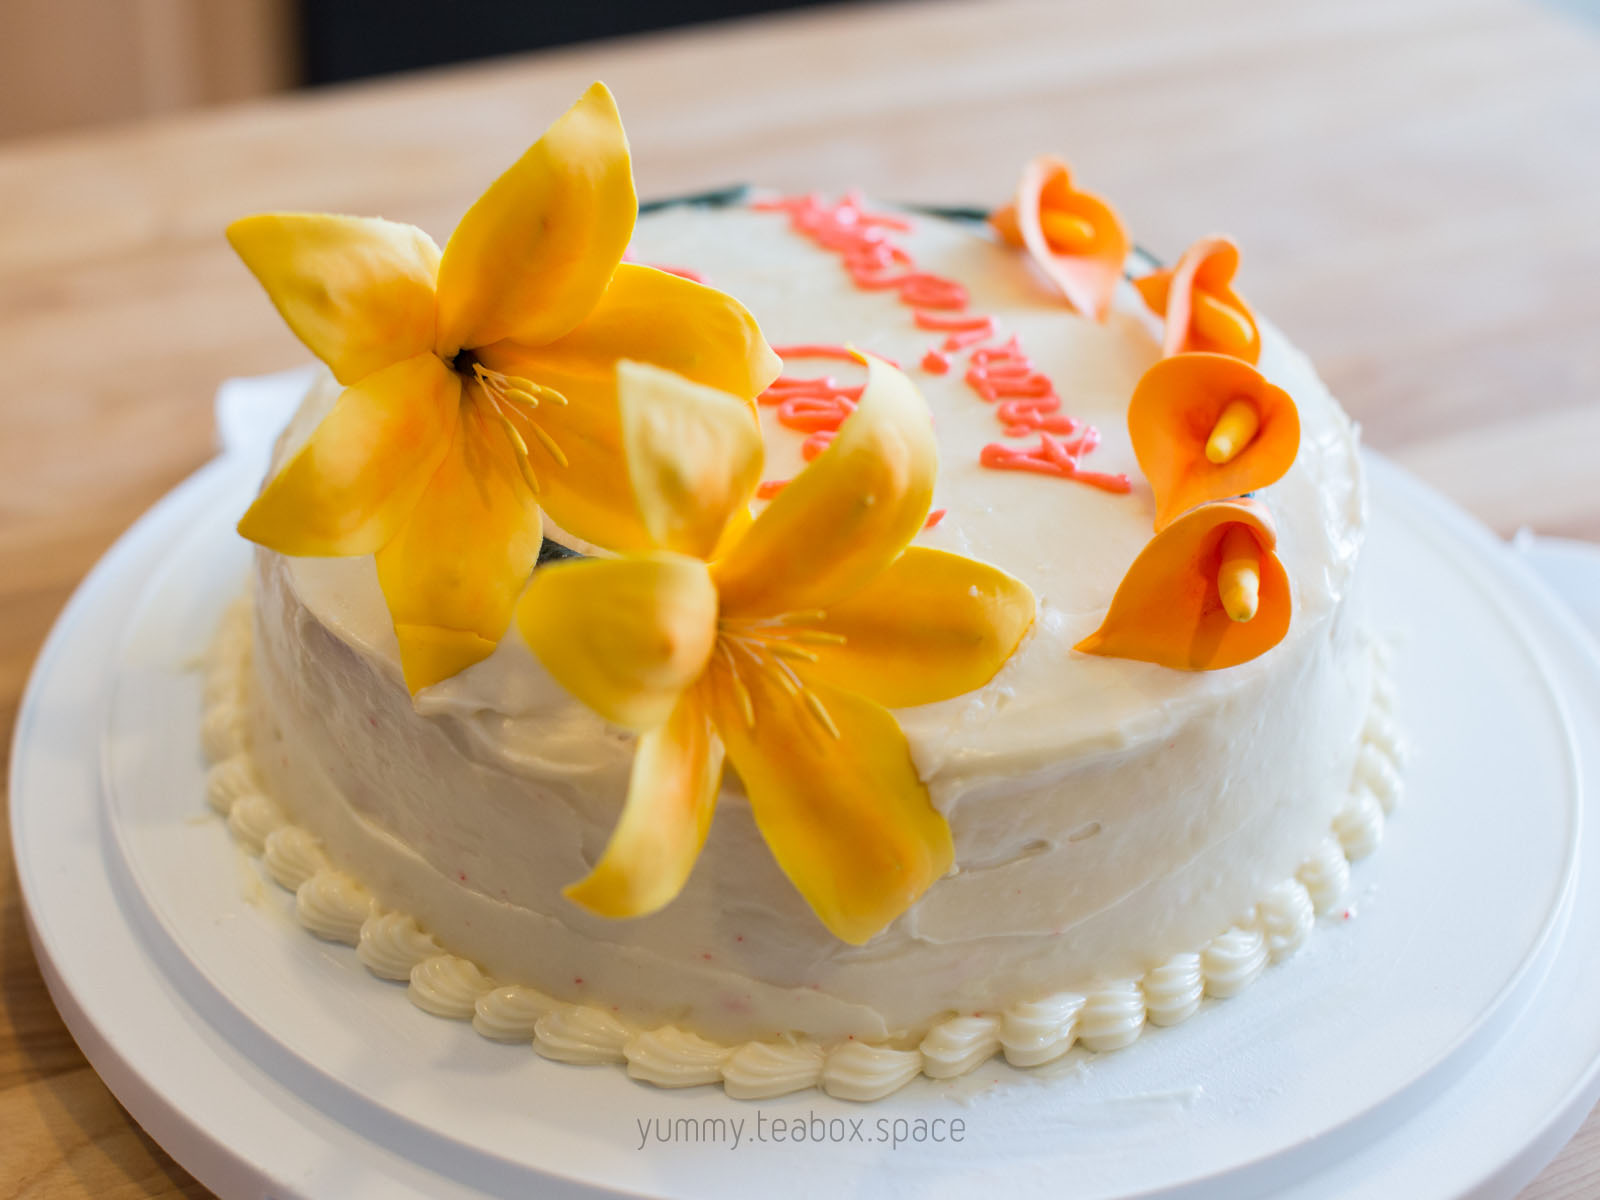 Round cake with white frosting and decorated with yellow lilies and orange calla lilies.